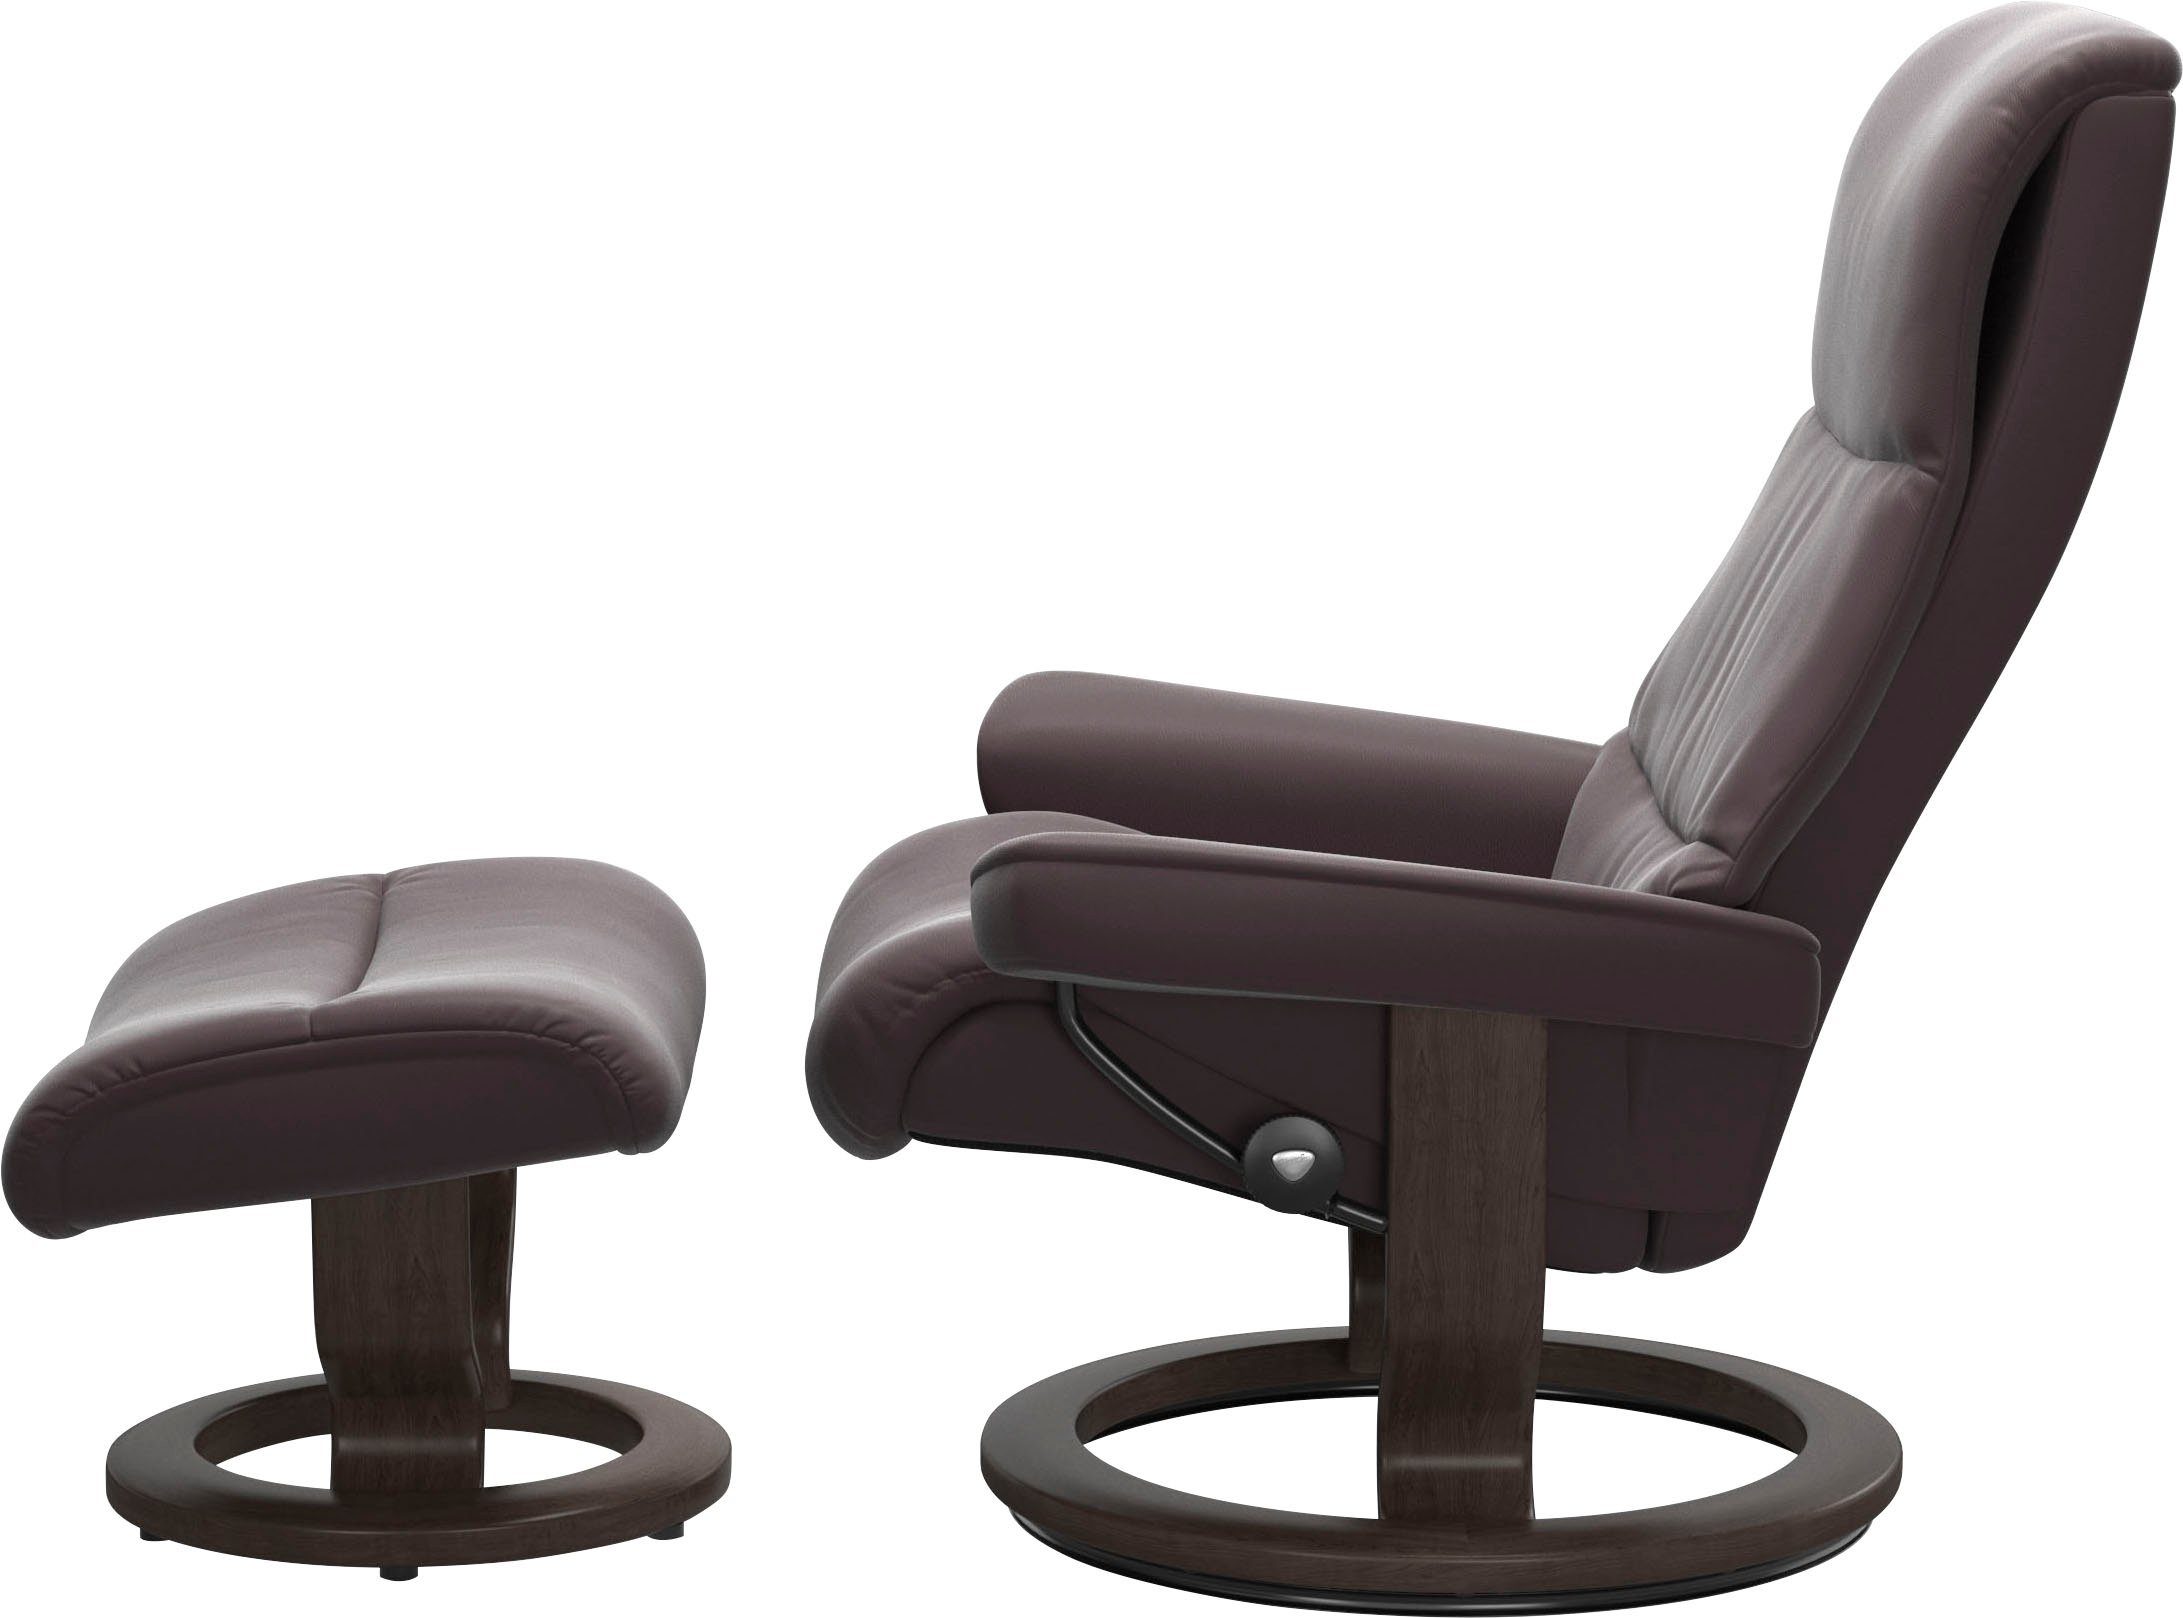 Wenge View, Relaxsessel Stressless® Base, mit Classic M,Gestell Größe